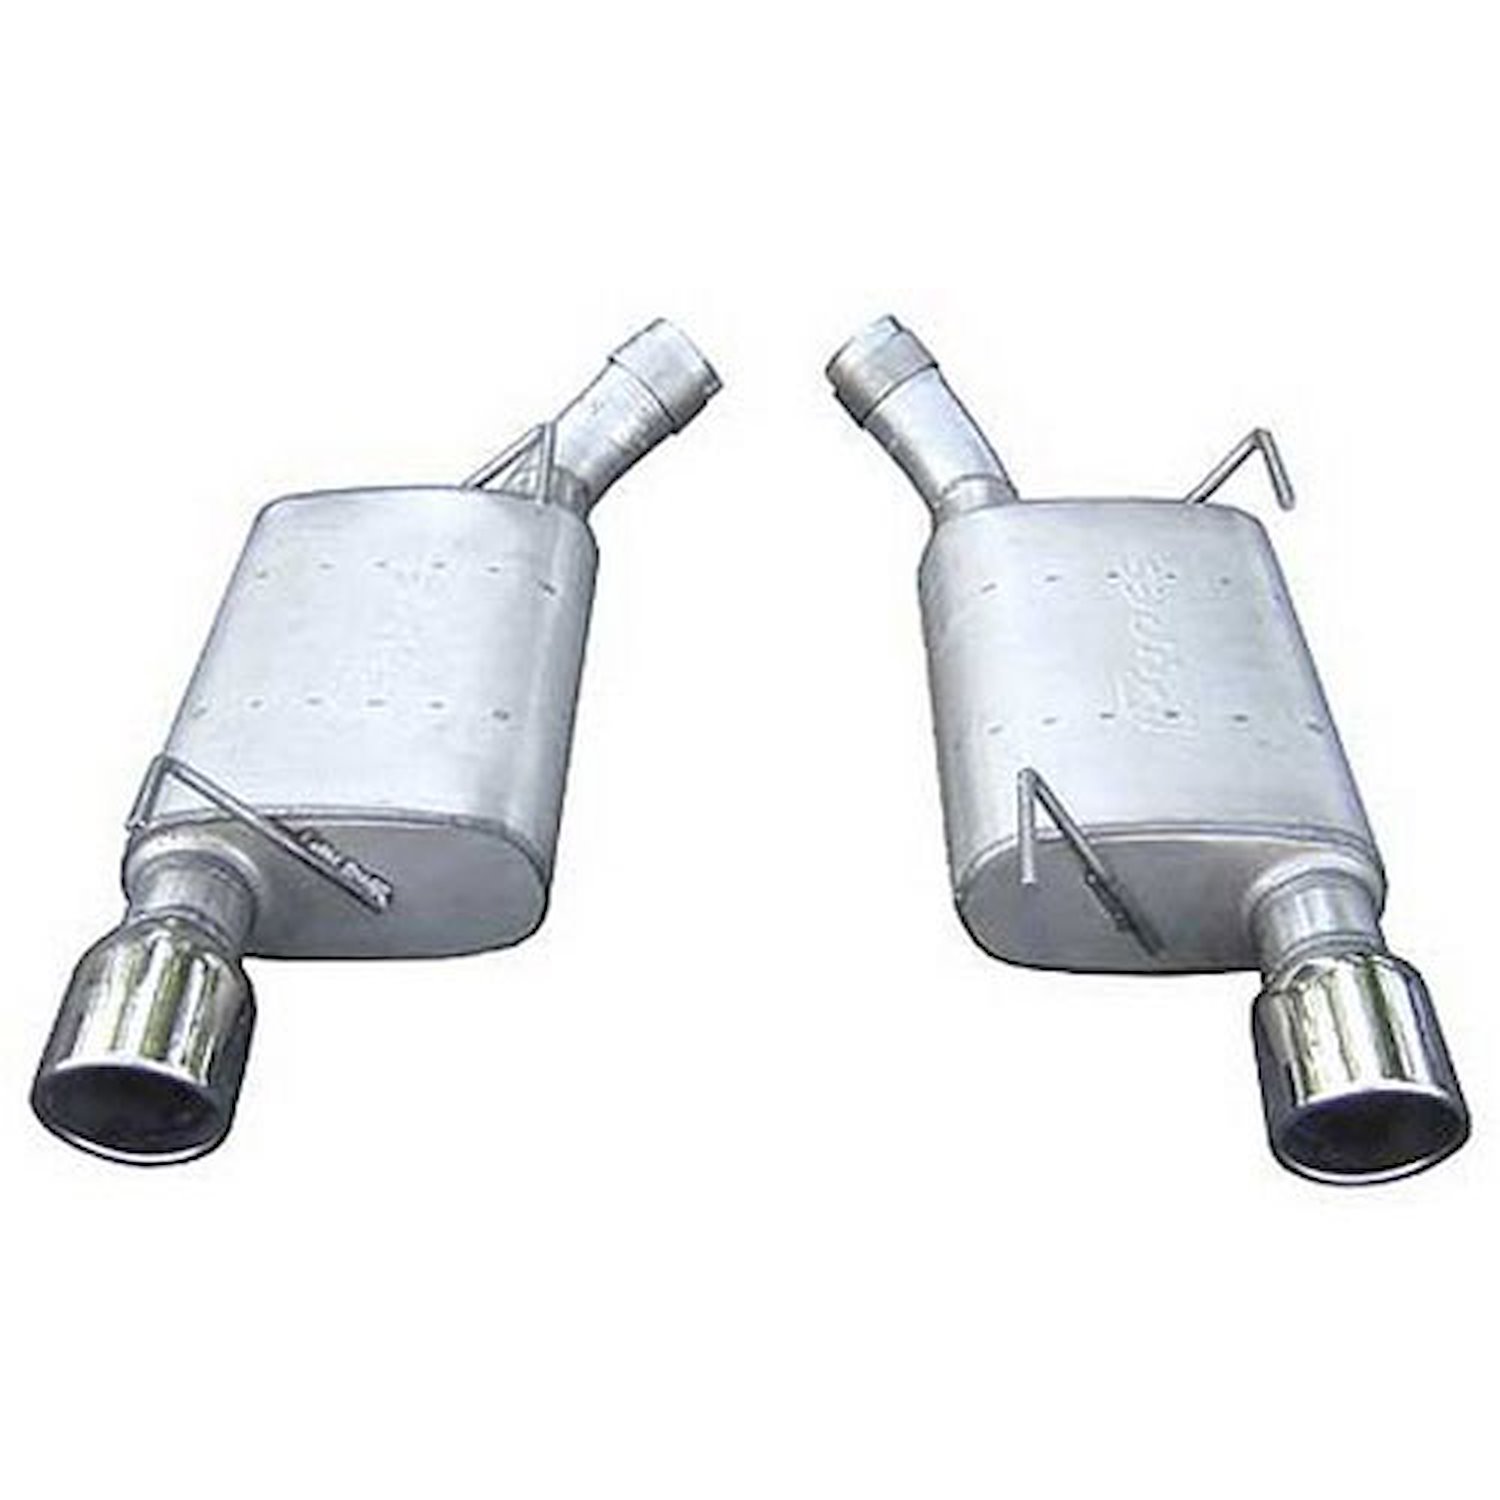 Violator Axle-Back Exhaust System 2005-10 Mustang GT 4.6L